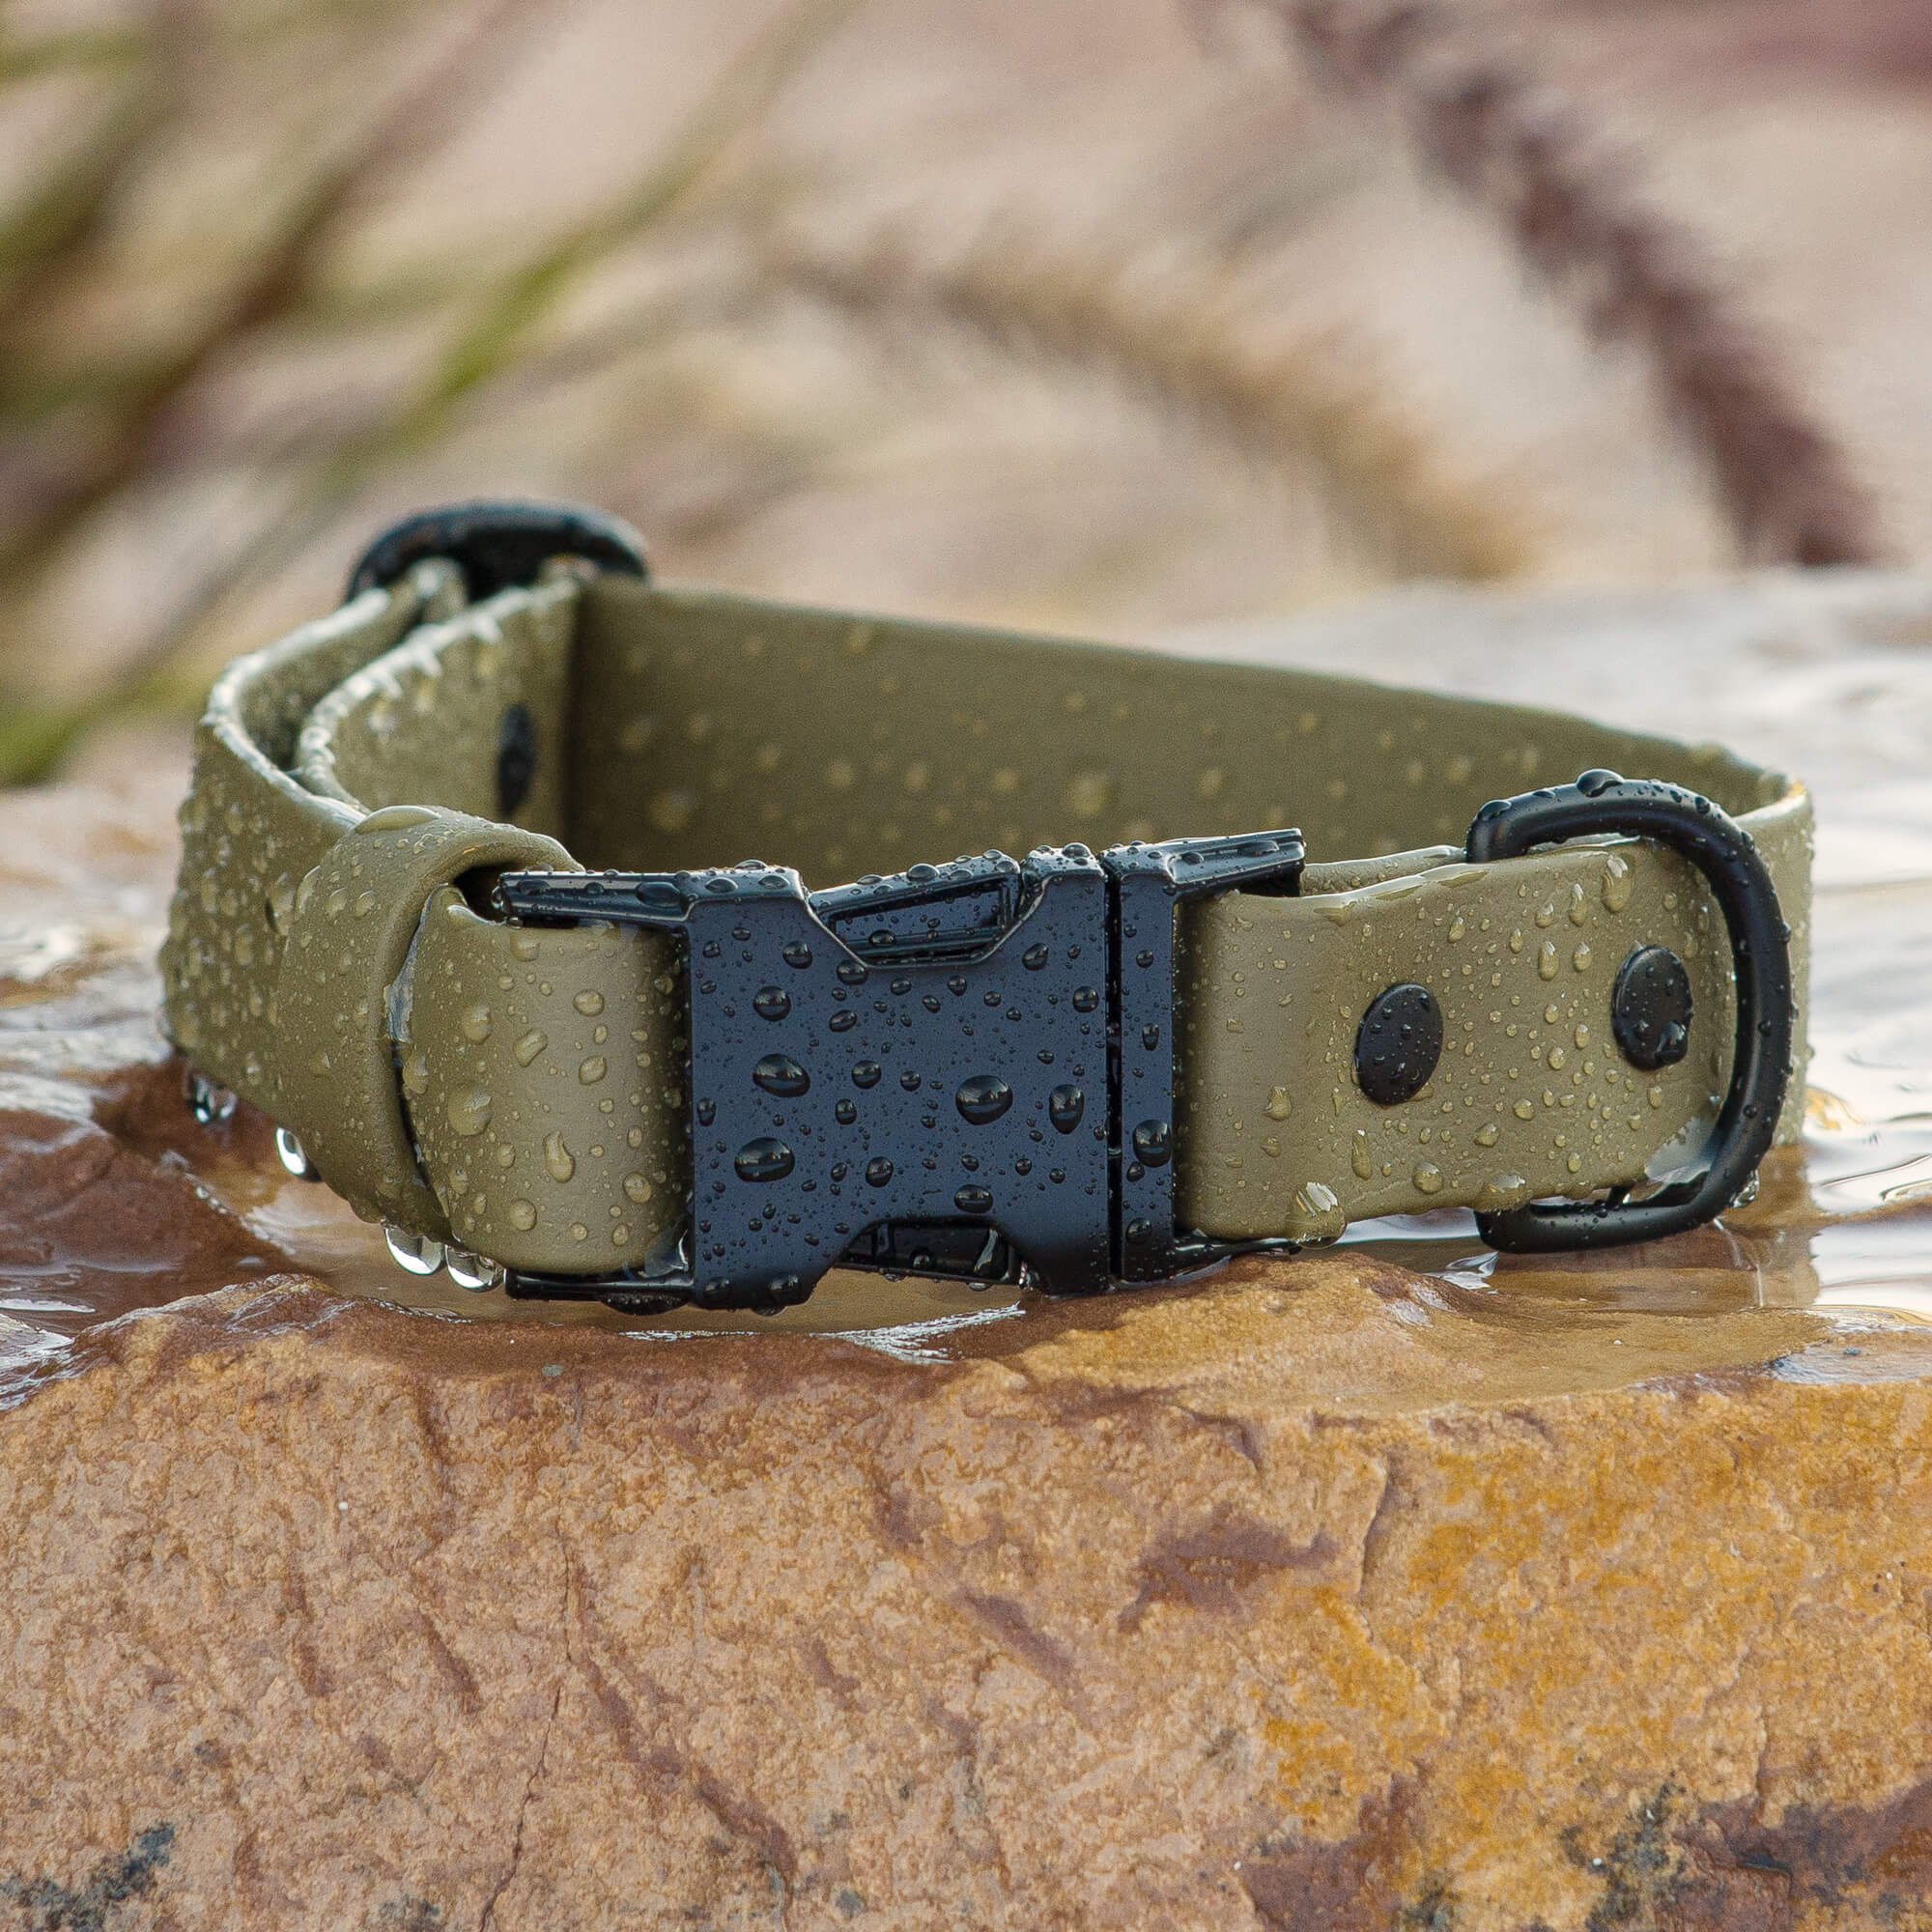 BioThane Olive colored collar with matte black buckle